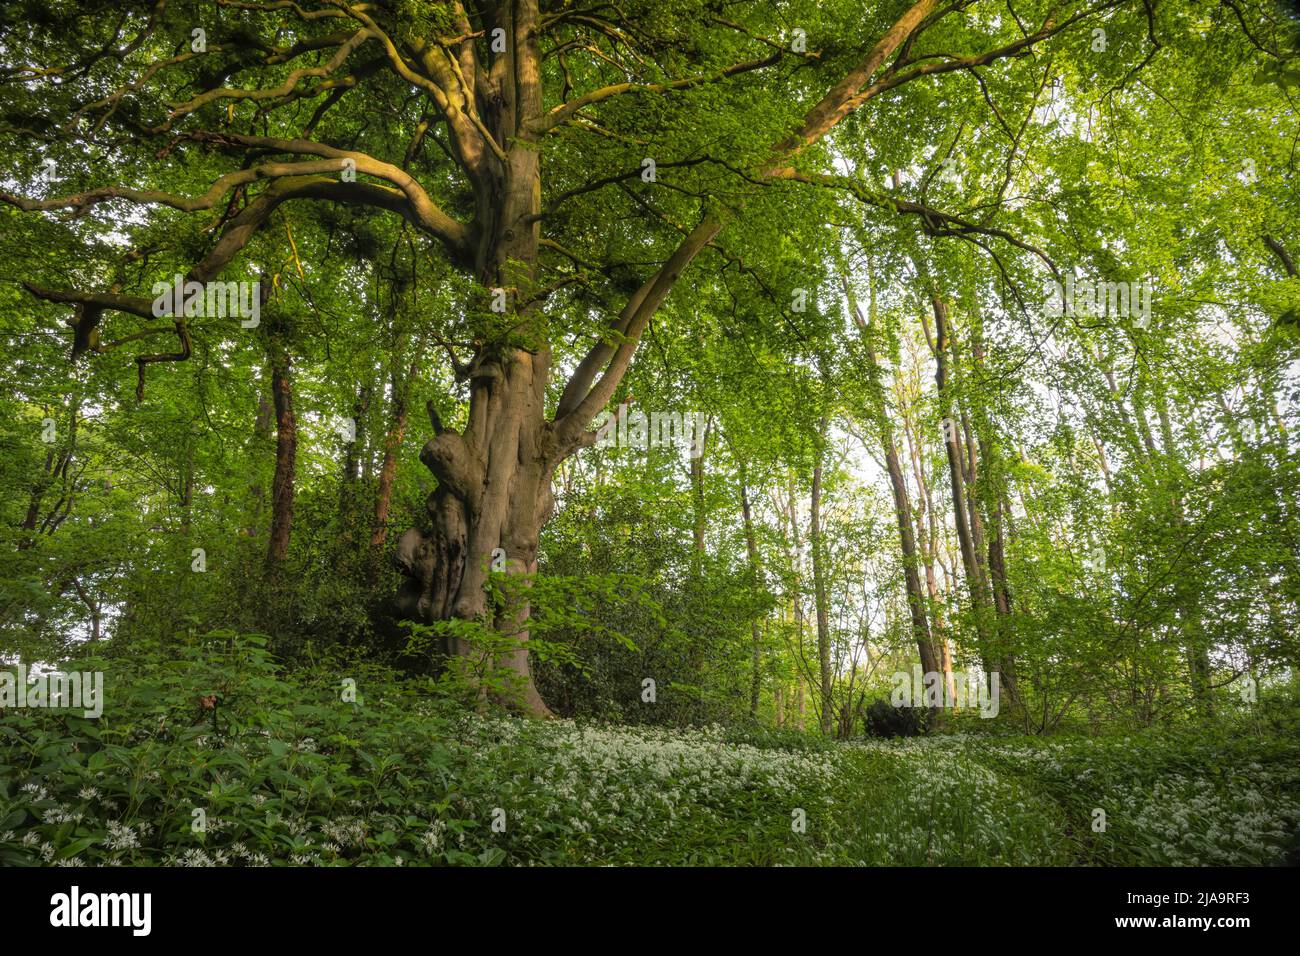 Wild Garlic or Ramsons (Allium ursinum) growing in a North Cotswold wood, England. Stock Photo